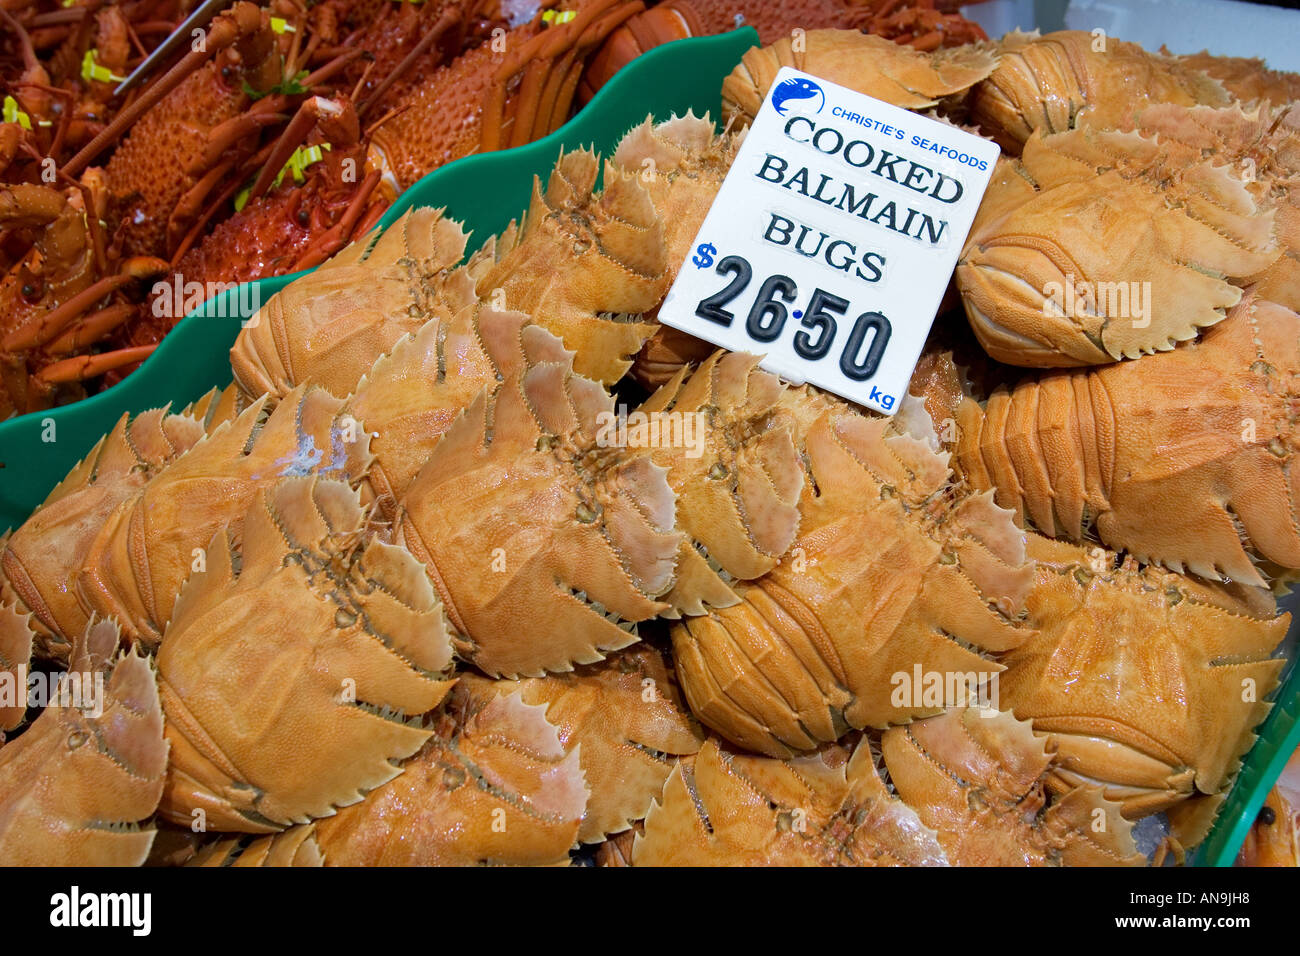 cooked-balmain-bugs-for-sale-at-sydney-fish-market-darling-harbour-AN9JH8.jpg